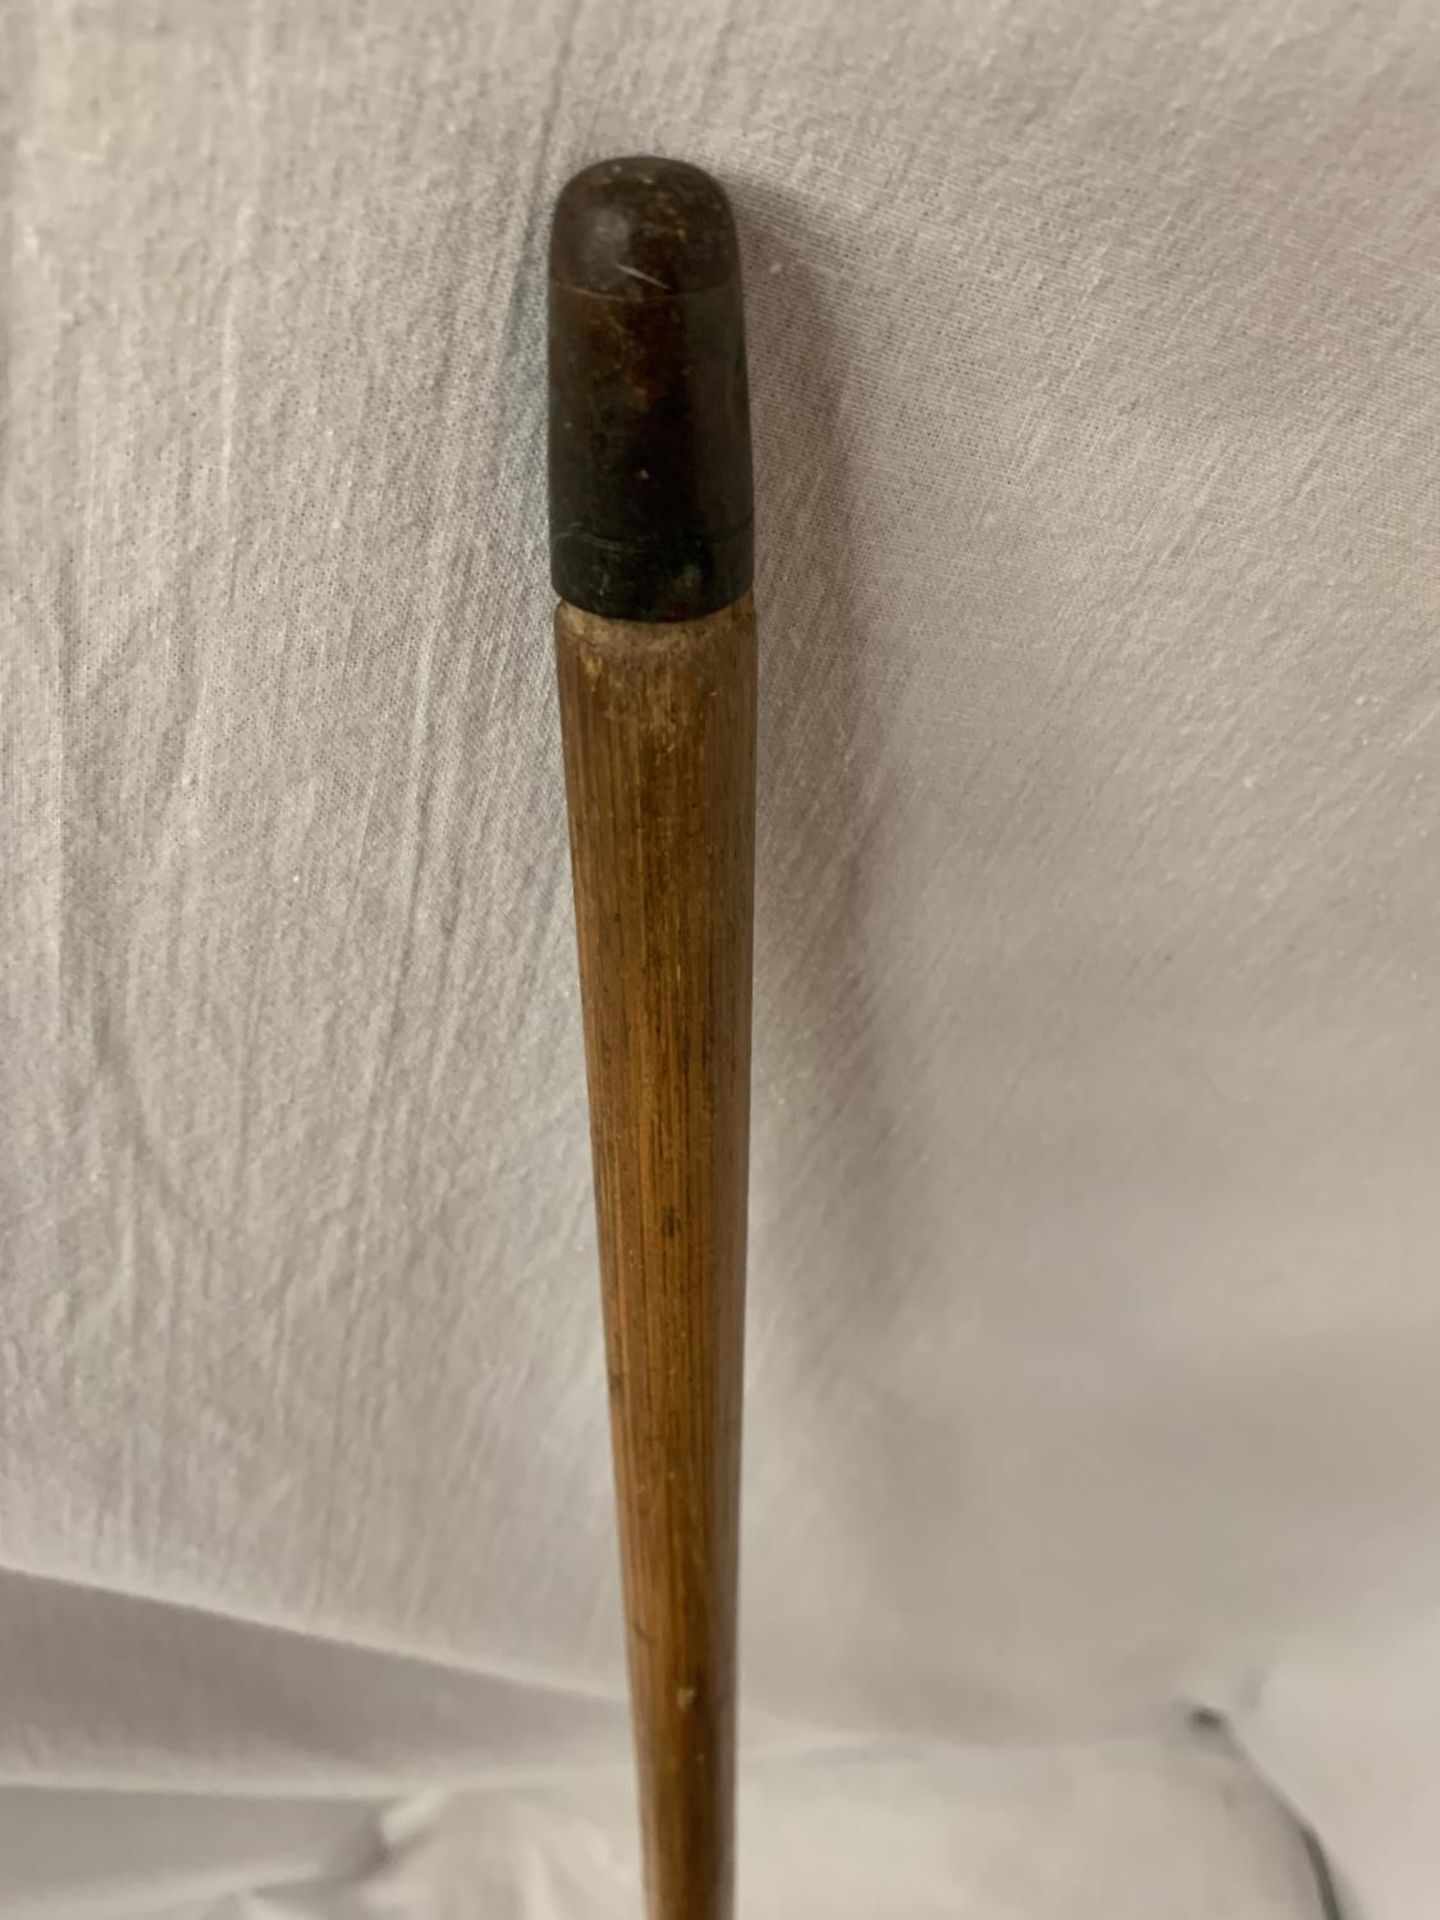 A VINTAGE SILVER TOPPED CANE - Image 3 of 3